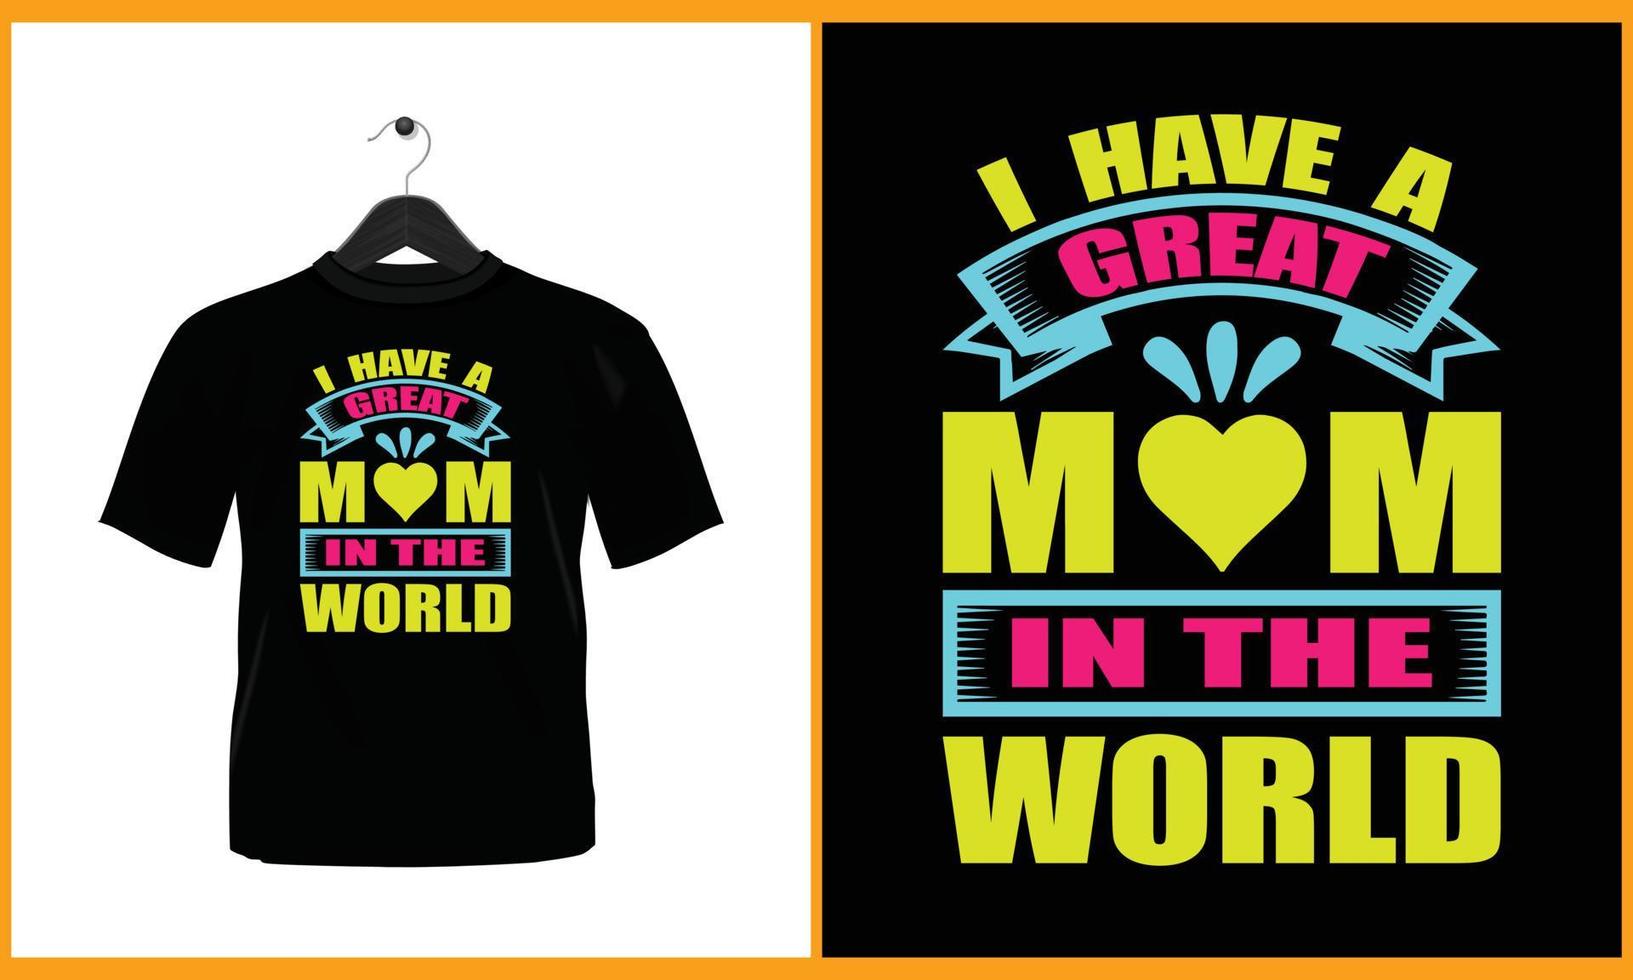 I have a great mom in the world - Typography vector t shirt design